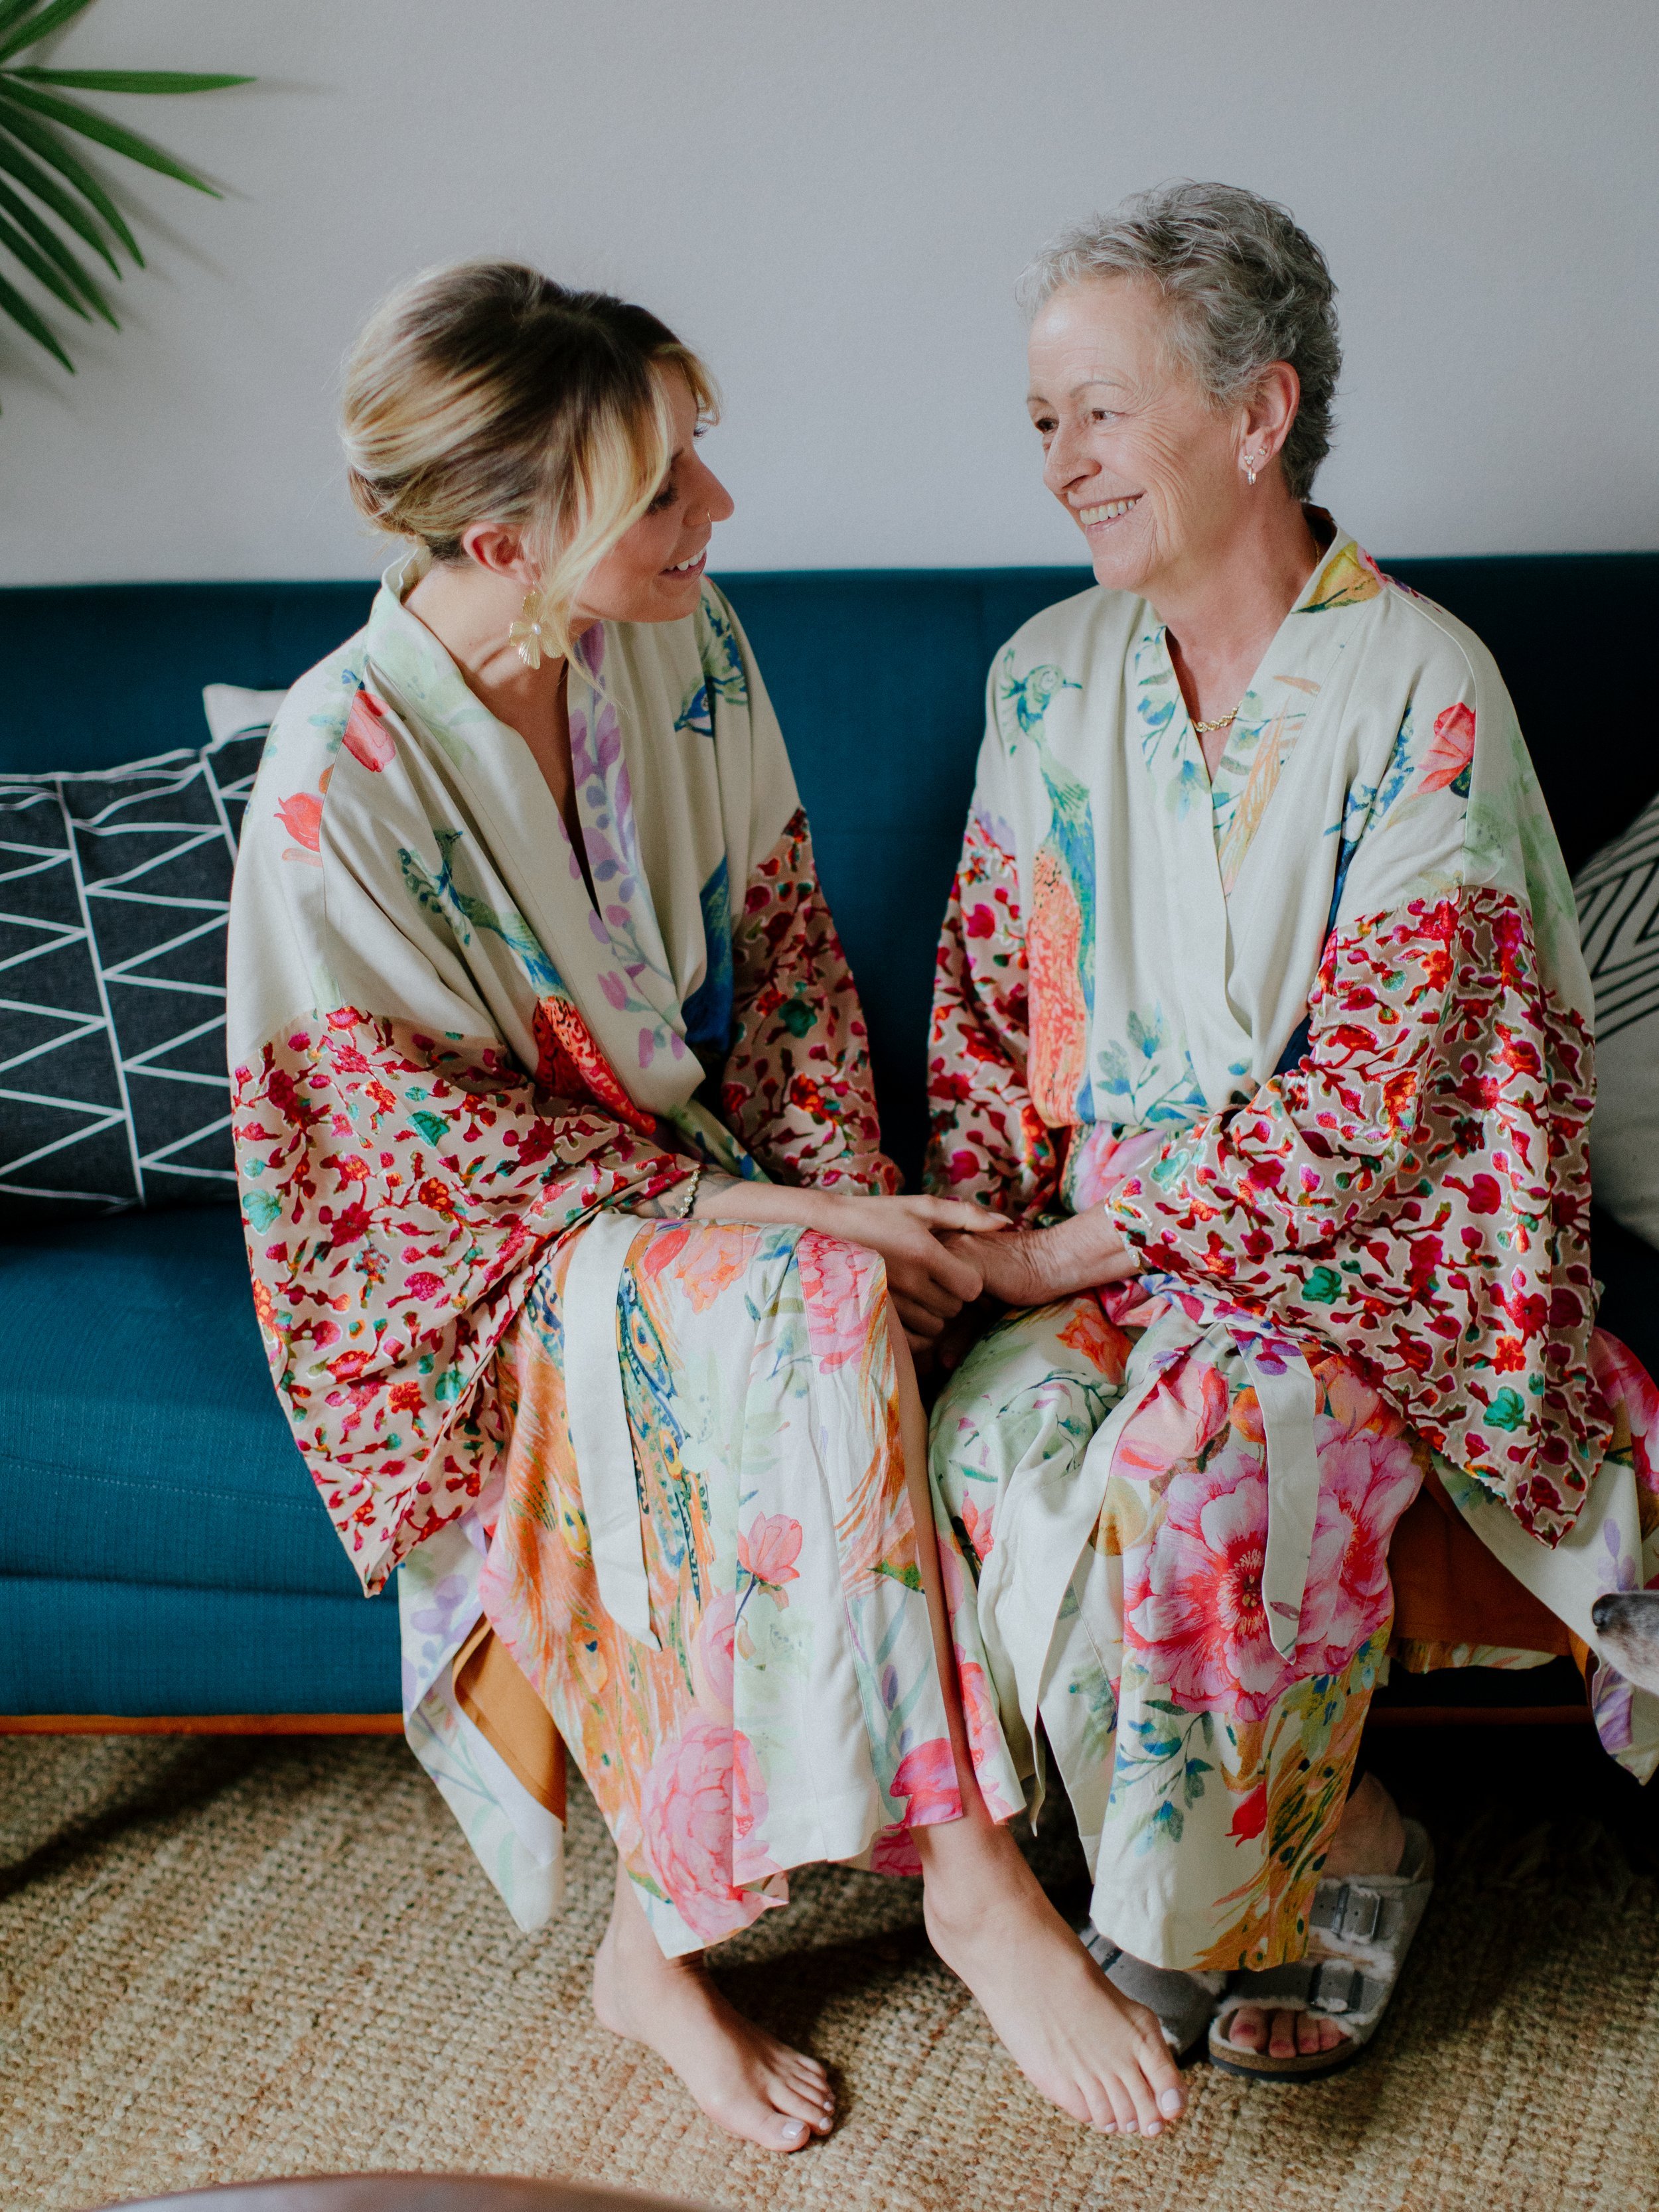 www.santabarbarawedding.com | Chris J. Evans | Bride and Her Mom Getting Ready in Colorful Robes